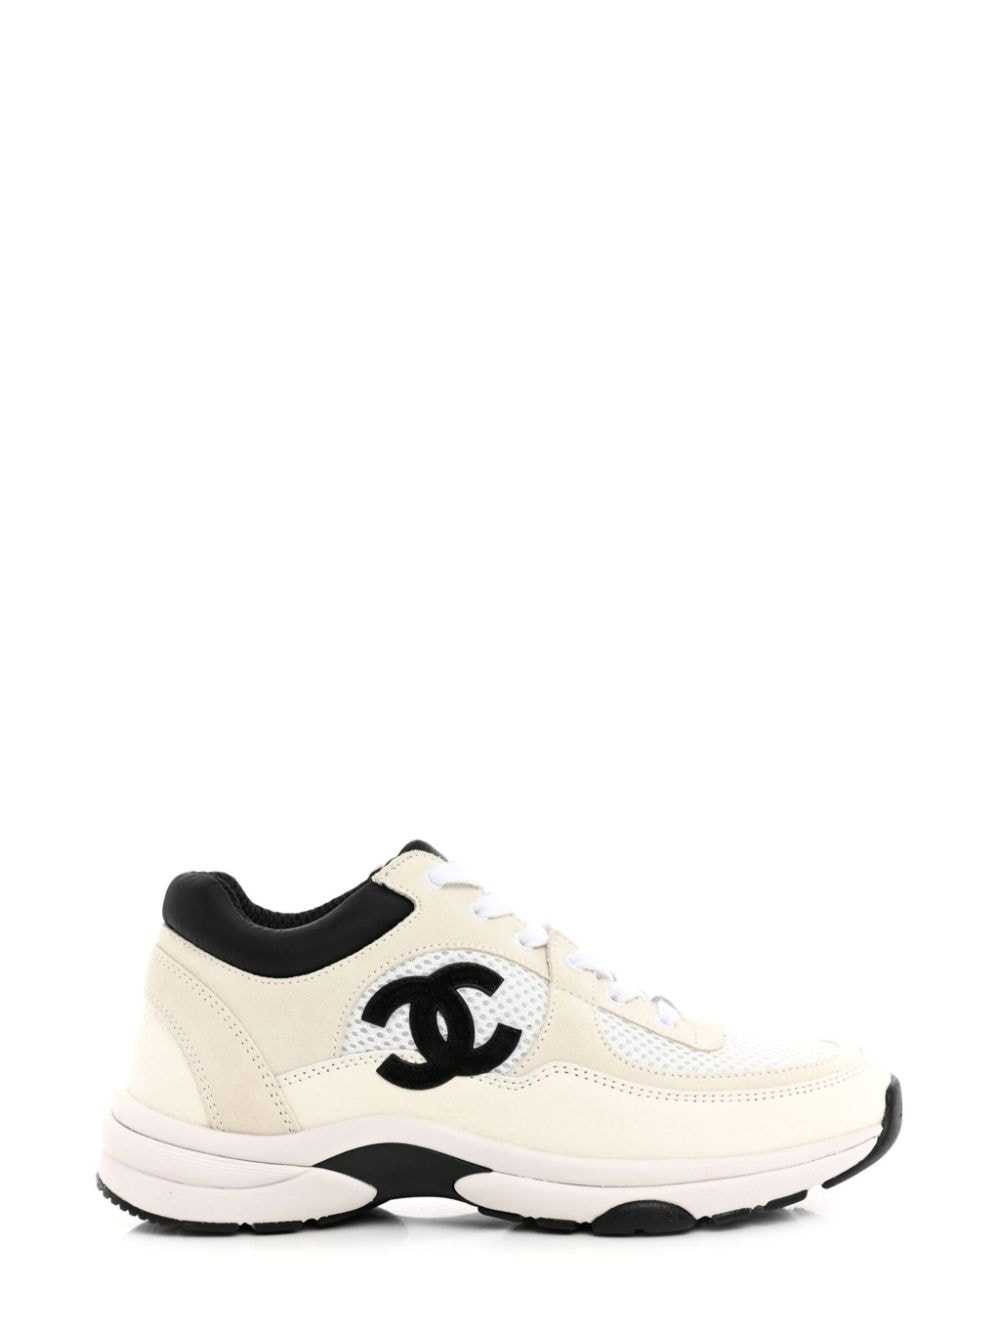 CHANEL Pre-Owned CC suede lace-up sneakers - White - image 1